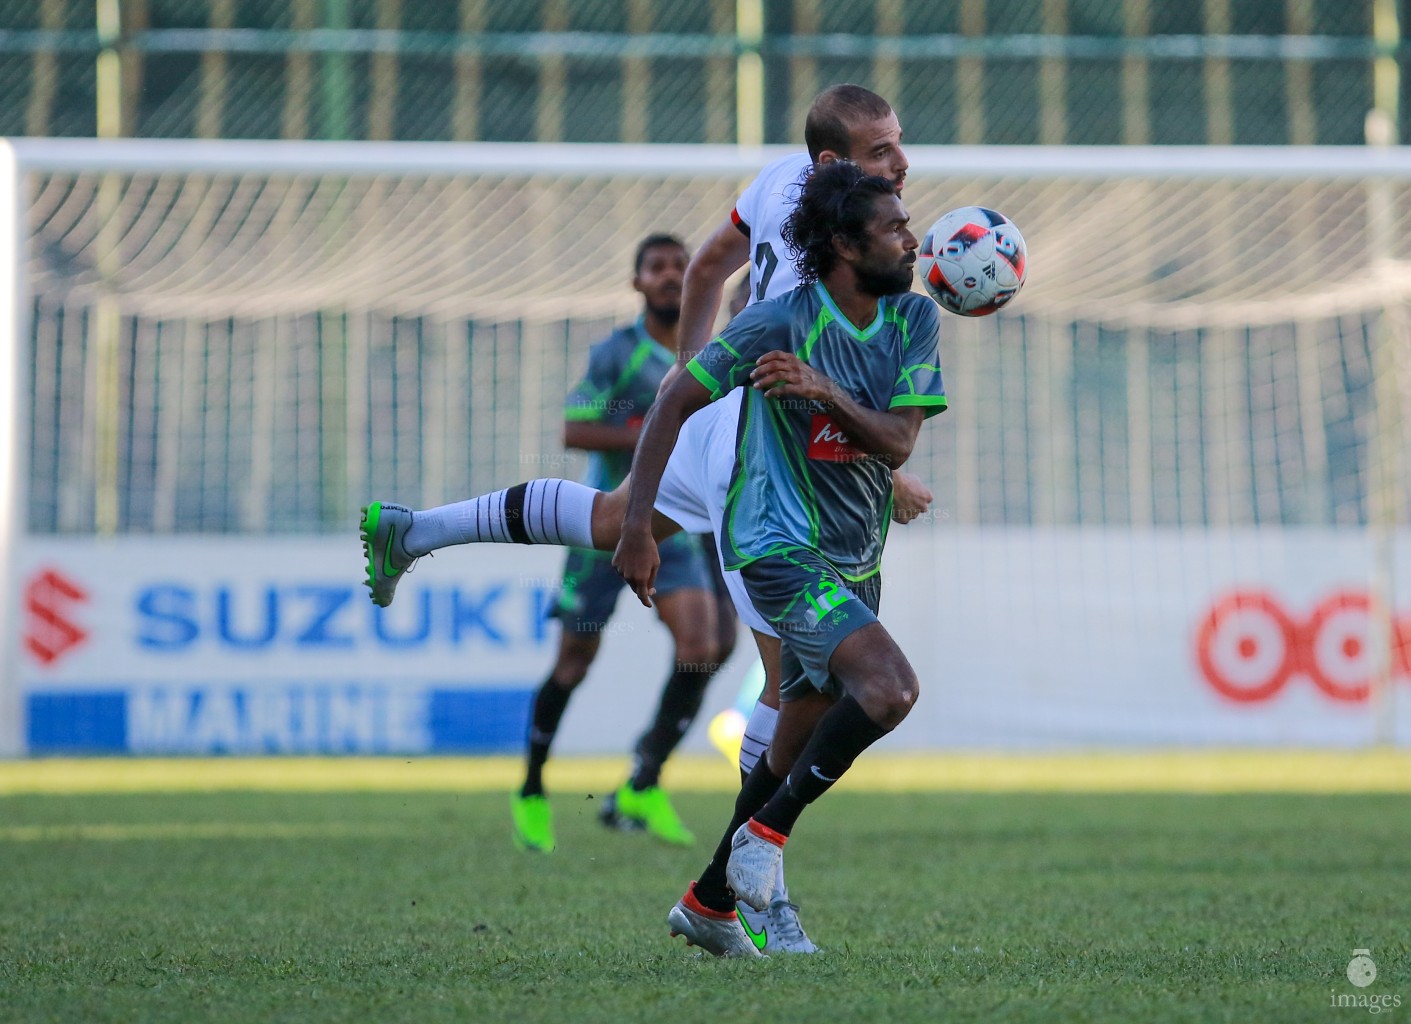 Green Street  vs TC Sports Club in the first round of STO Male League. Male , Maldives. Tuesday 8 May 2017. (Images.mv Photo/ Abdulla Abeedh).